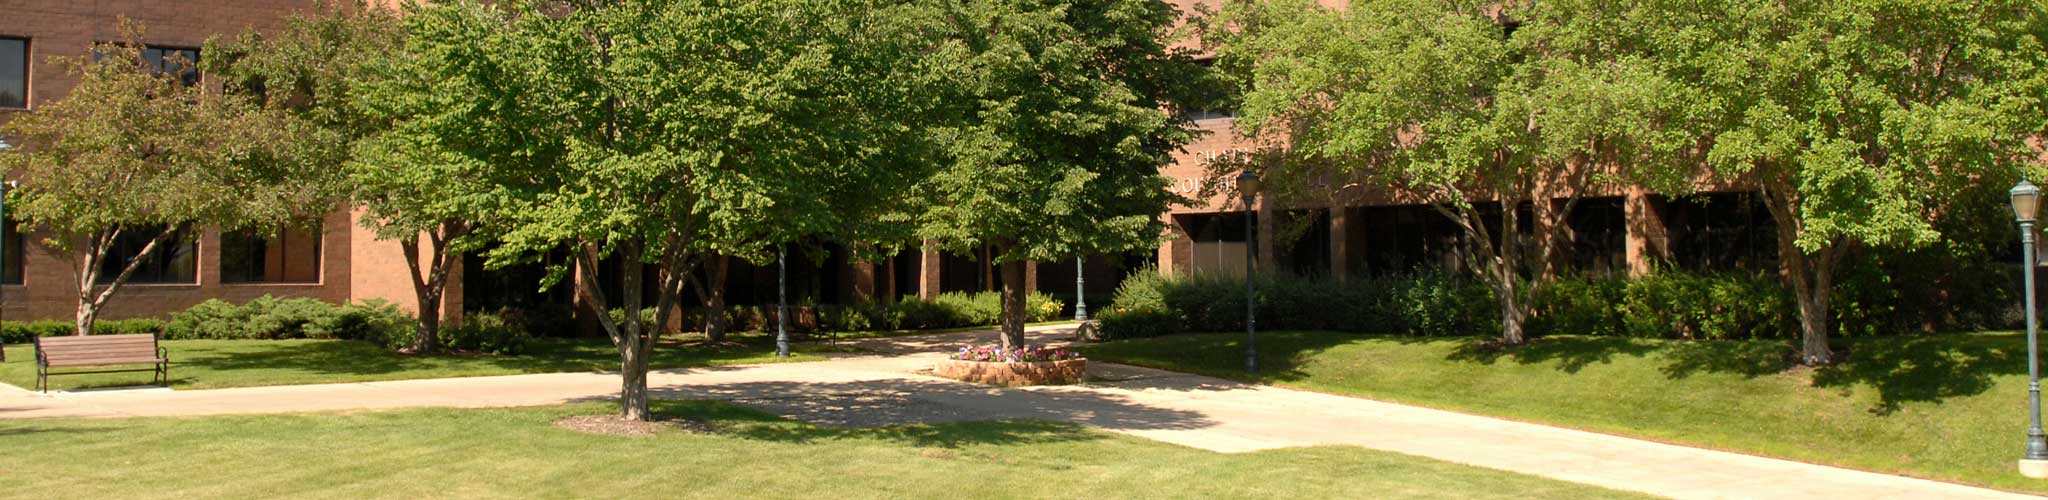 Coughlin Hall on Campus